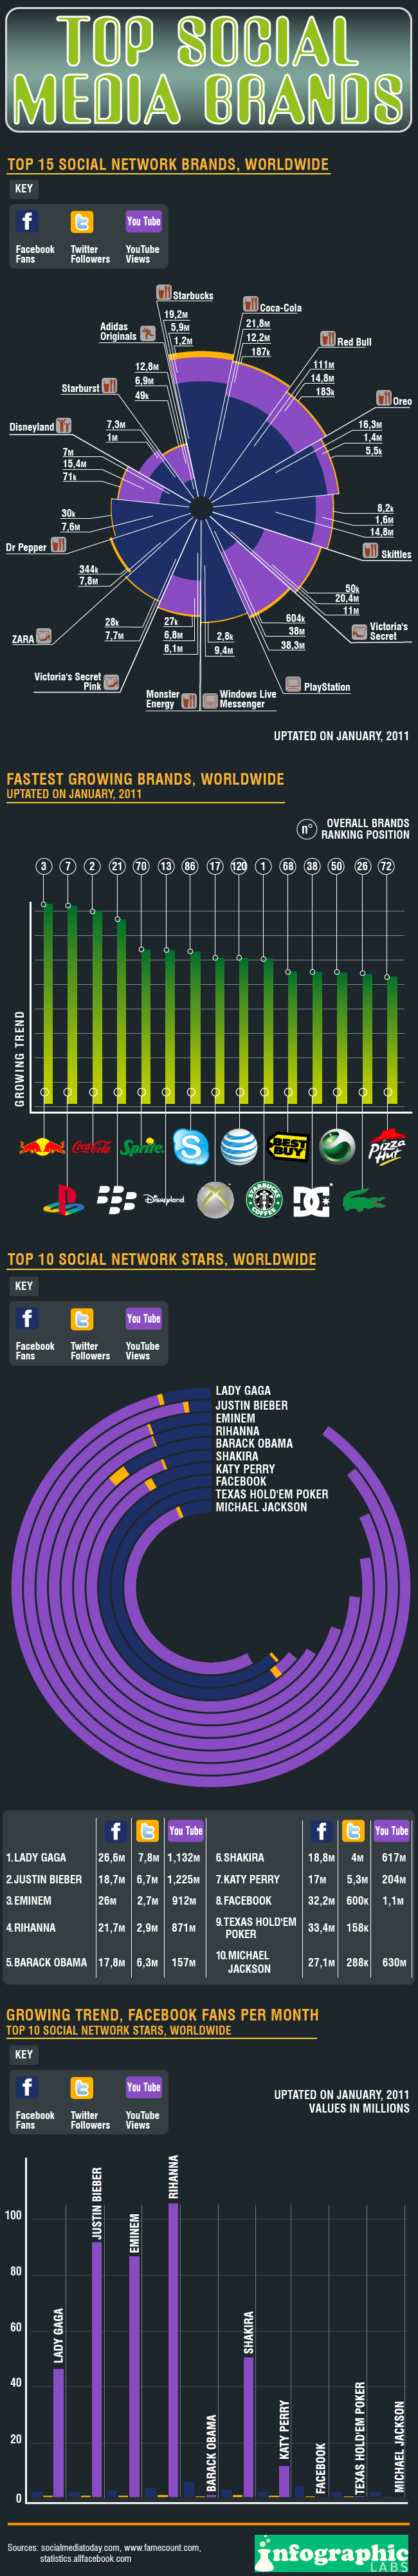 What are the Top Social Media Brands?